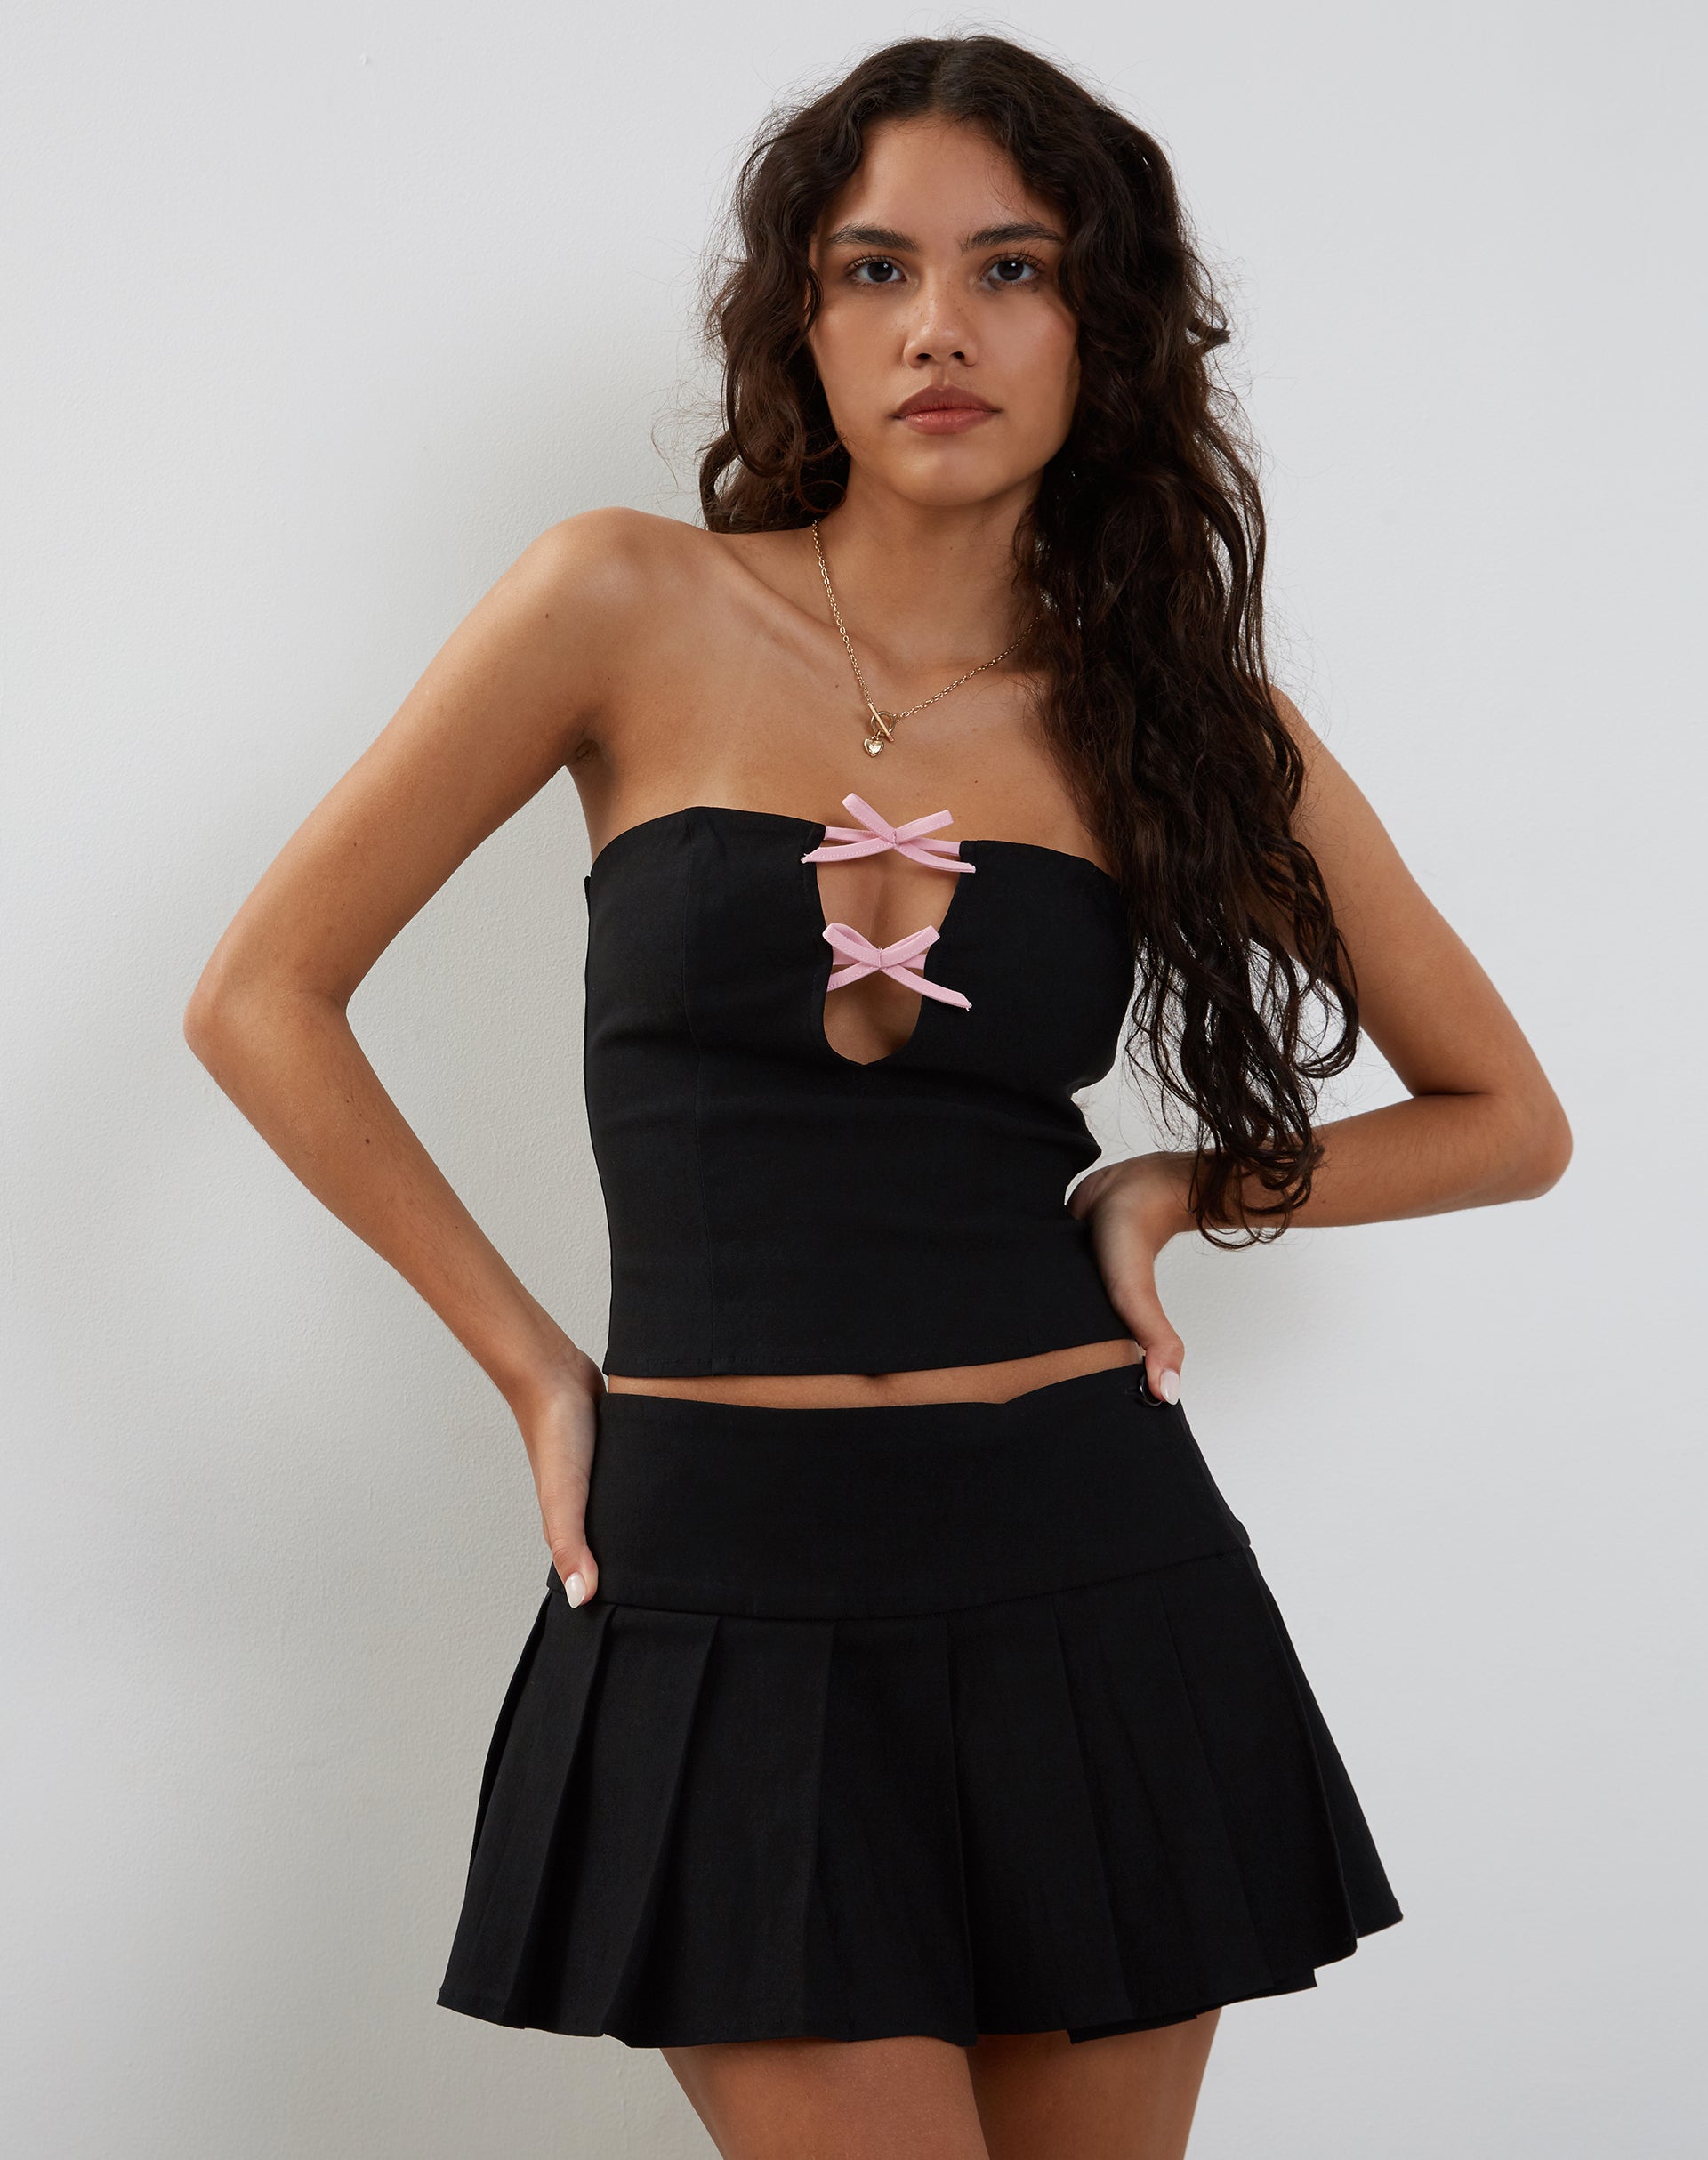 Image of Novanto Bandeau Top in Black with Pink Bows